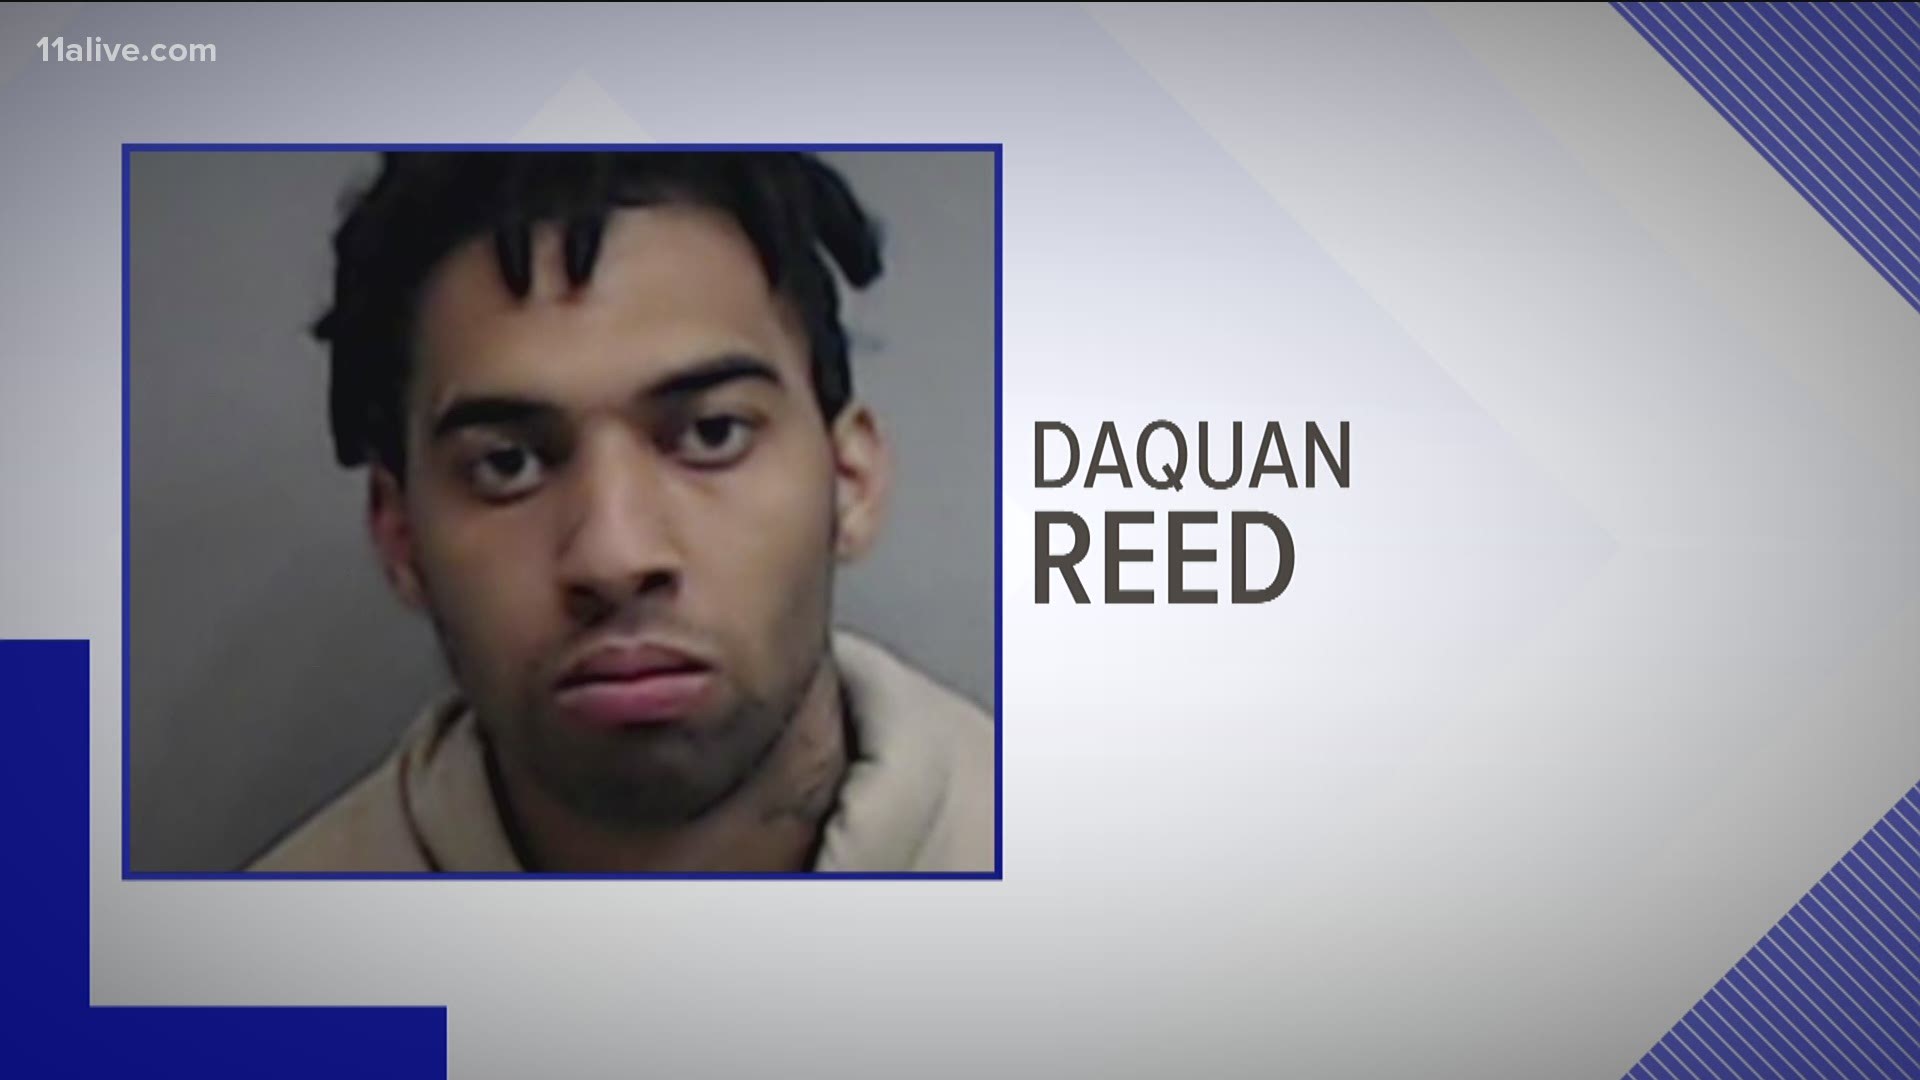 Daquan Reed, 24, had been wanted in connection to the Dec. 21 shooting. He was caught Jan. 6 in Hampton, Virginia and taken into custody.